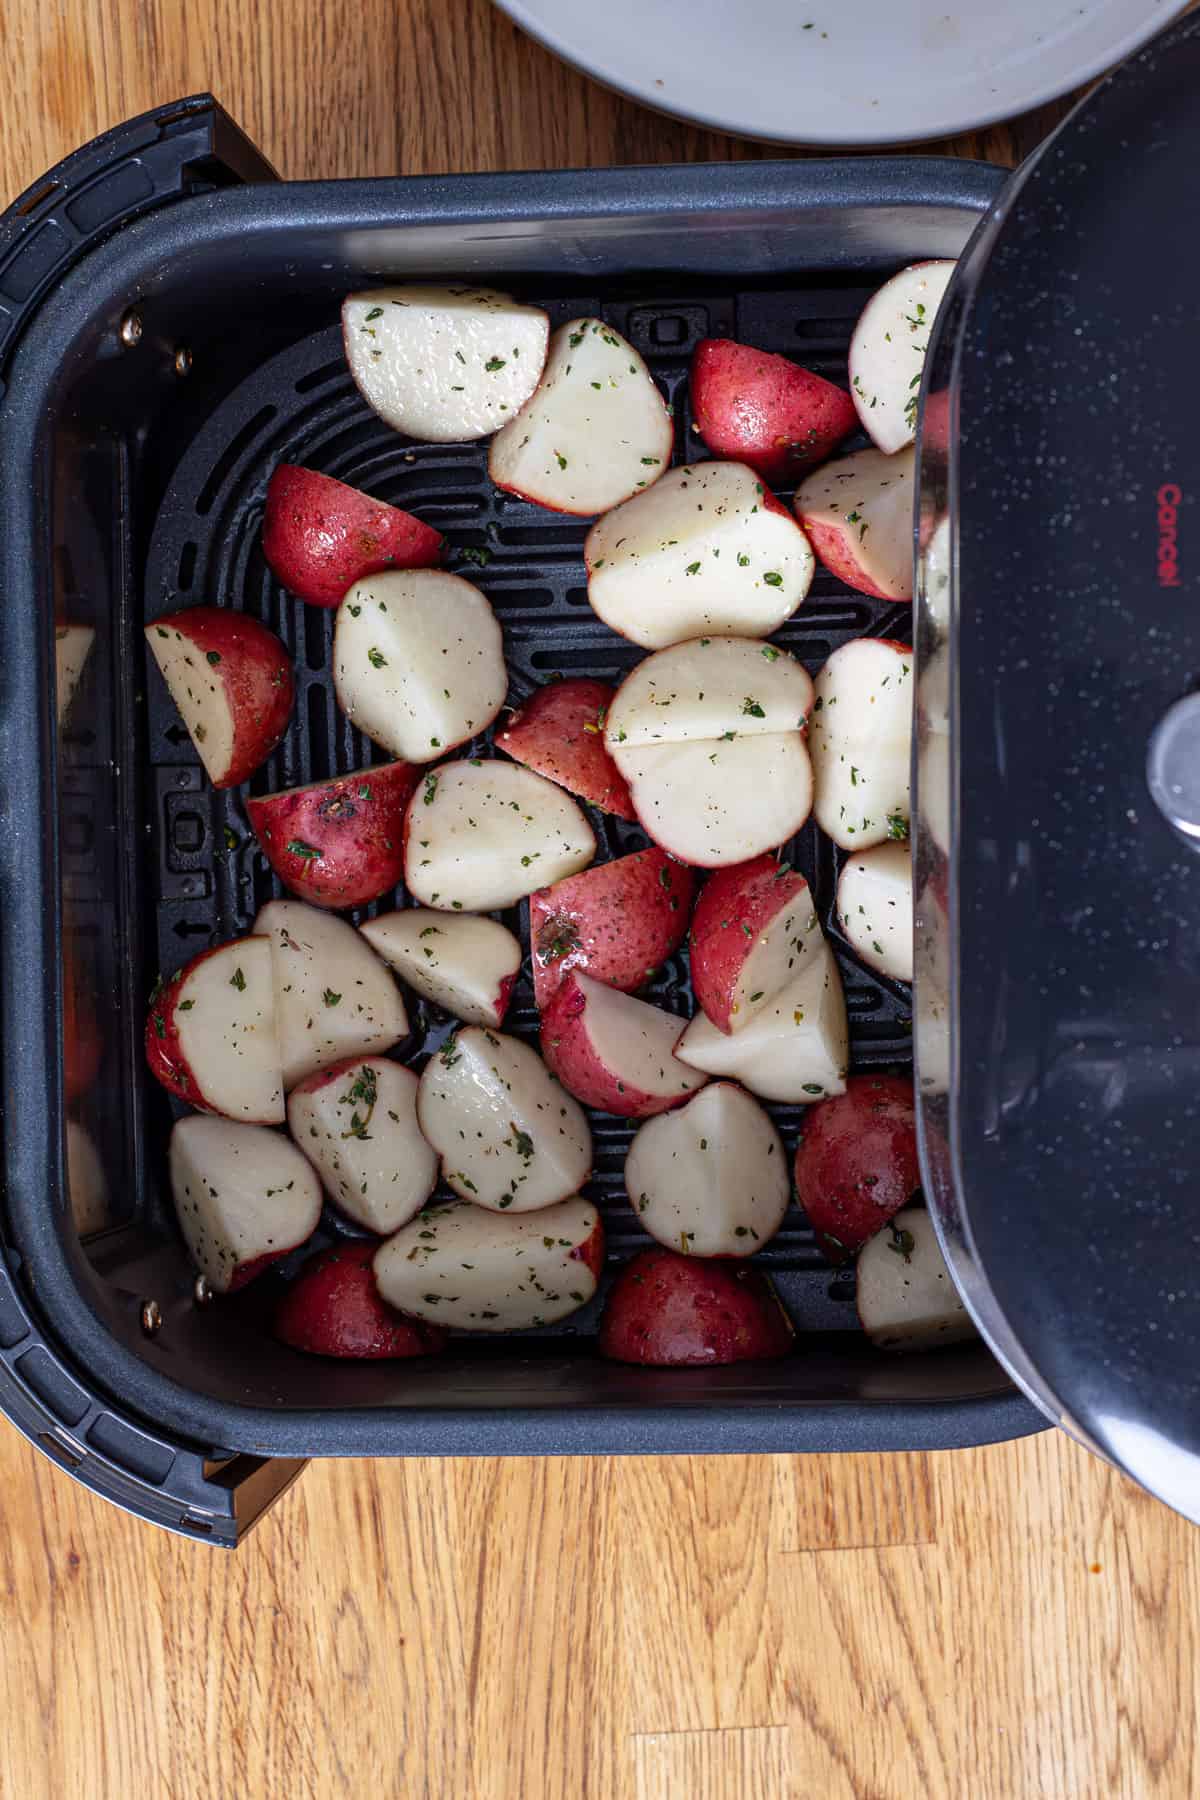 A basket of an air fryer filled with chopped seasoned red potatoes.